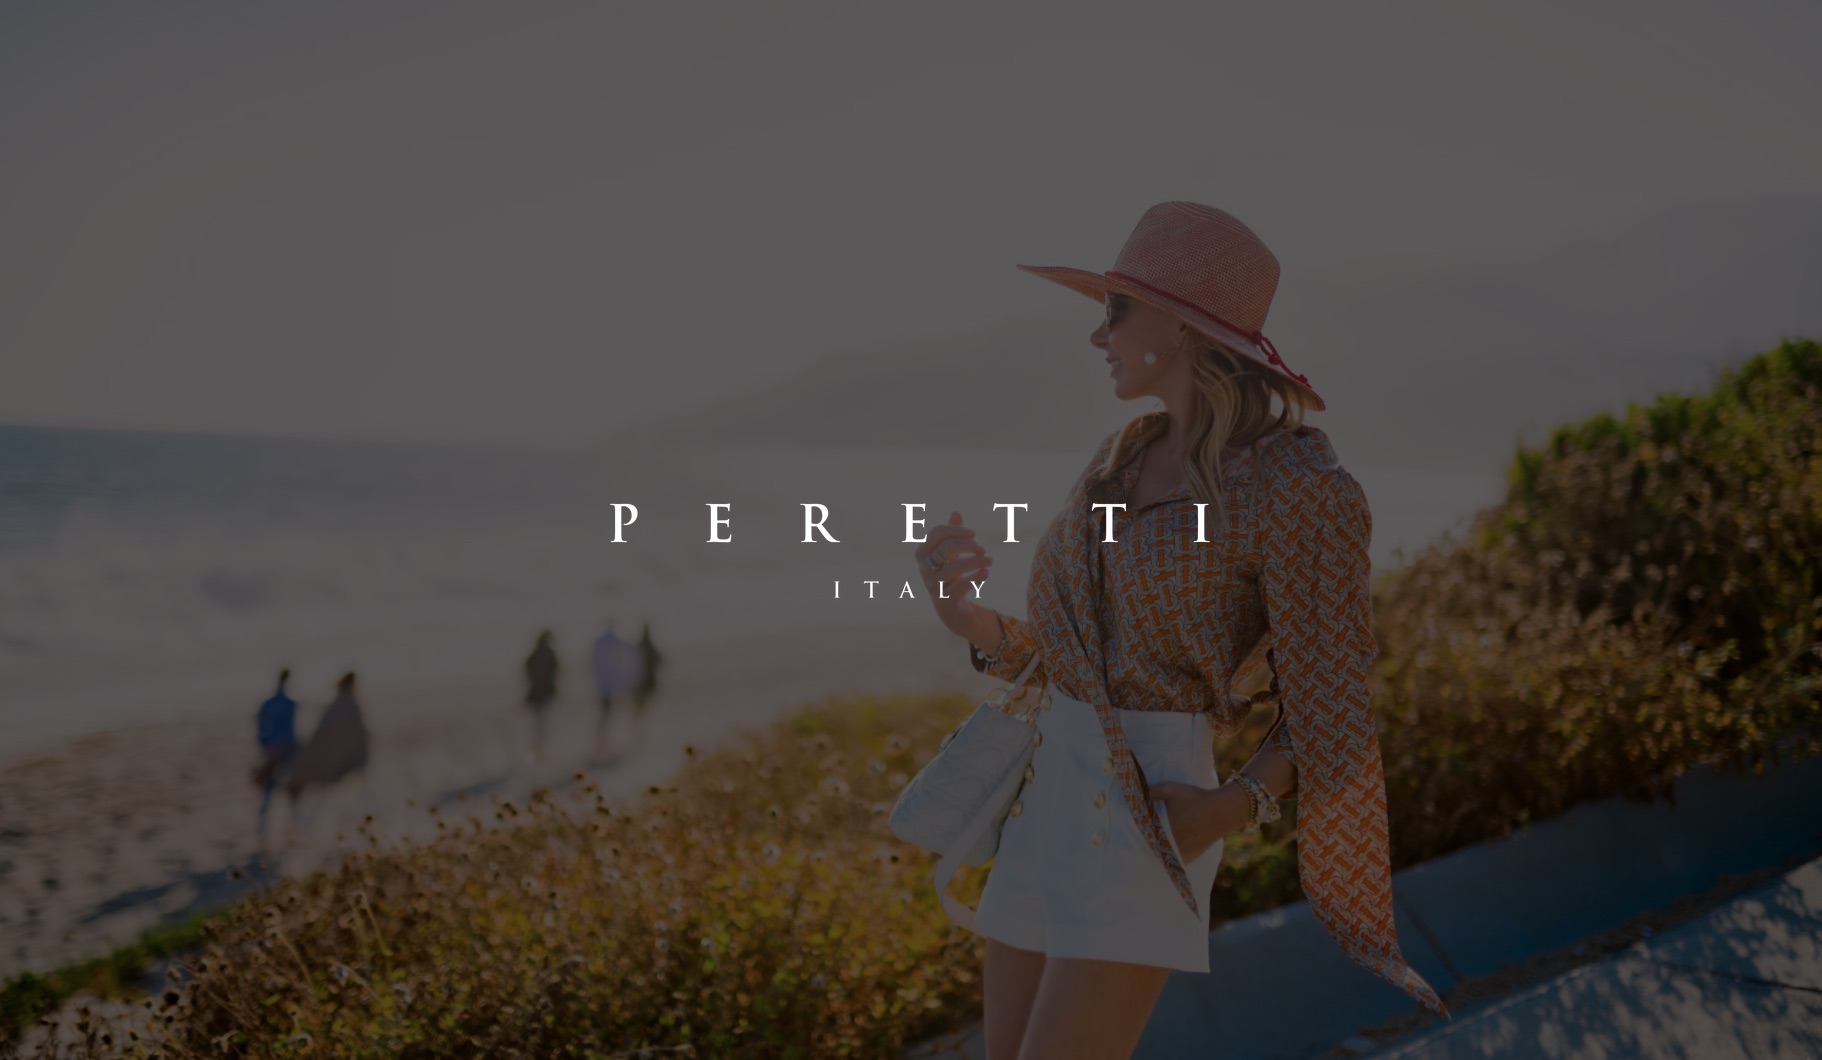 IU C&I Studios Page White Peretti Italy title with dimmed background side profile of woman wearing short white skirt, patterned top, red hat and shades standing by the beach